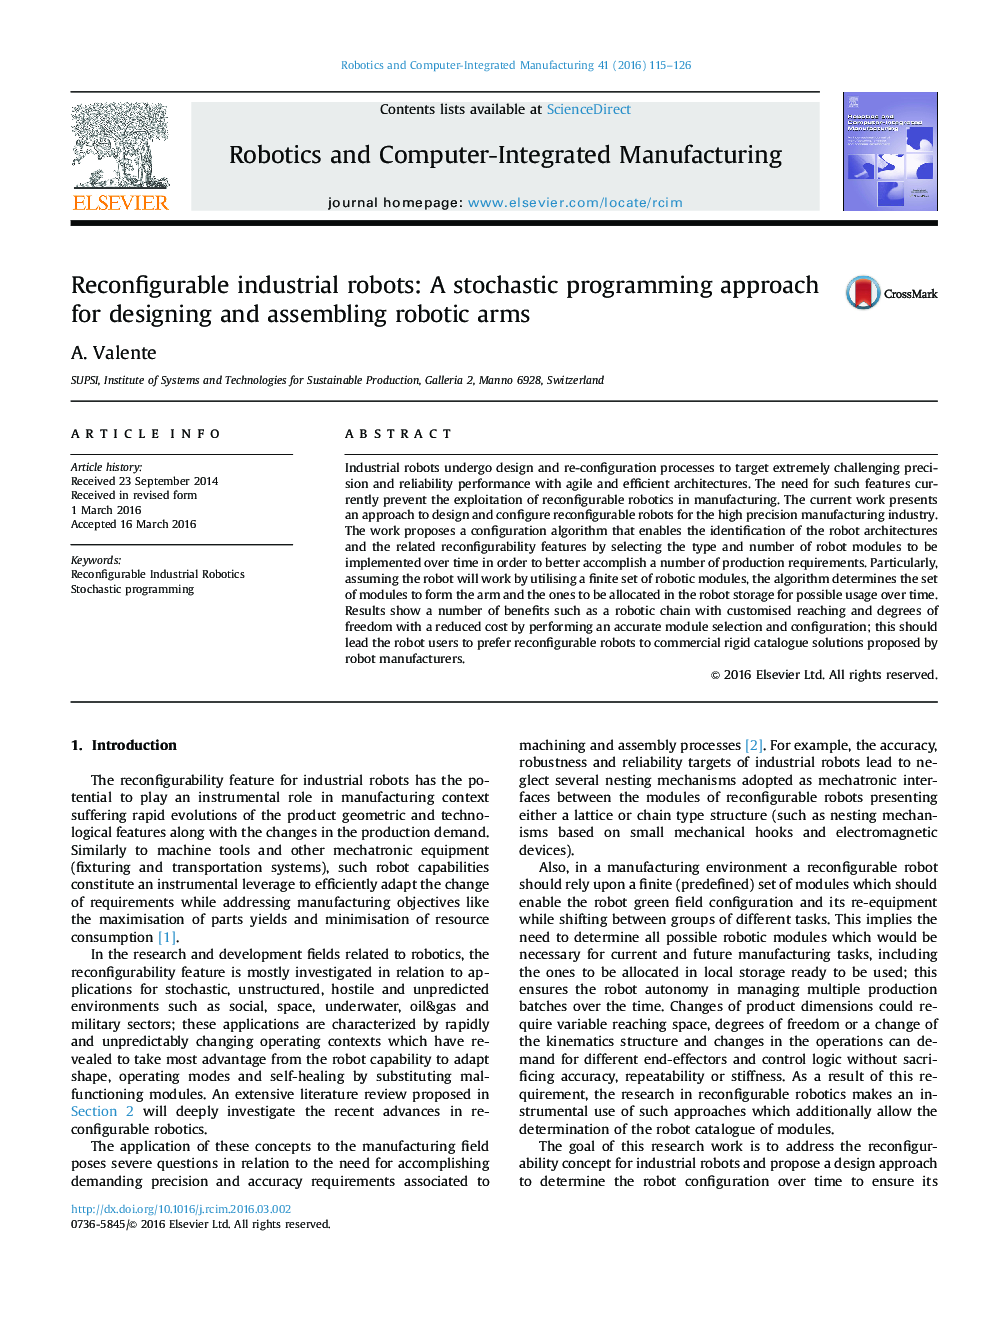 Reconfigurable industrial robots: A stochastic programming approach for designing and assembling robotic arms